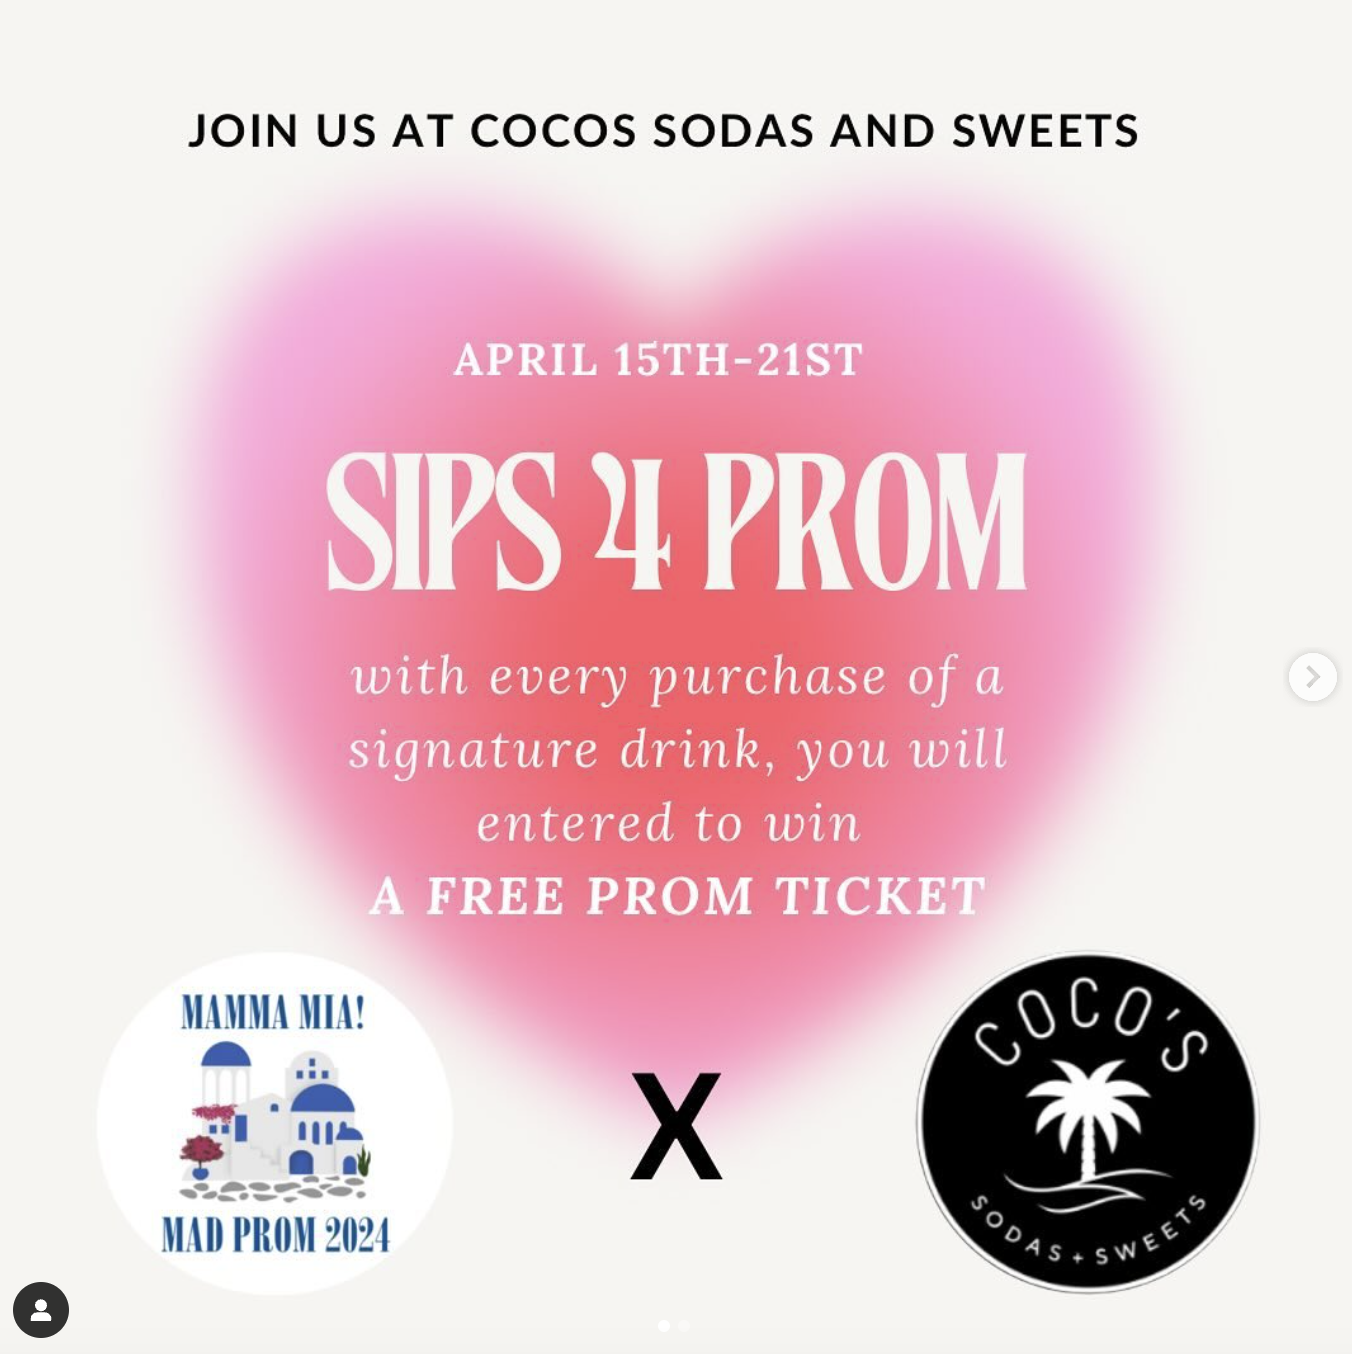 Image of poster announcing a team up between JMHS and Coco's. Buy a drink and be entered to win a free prom ticket.